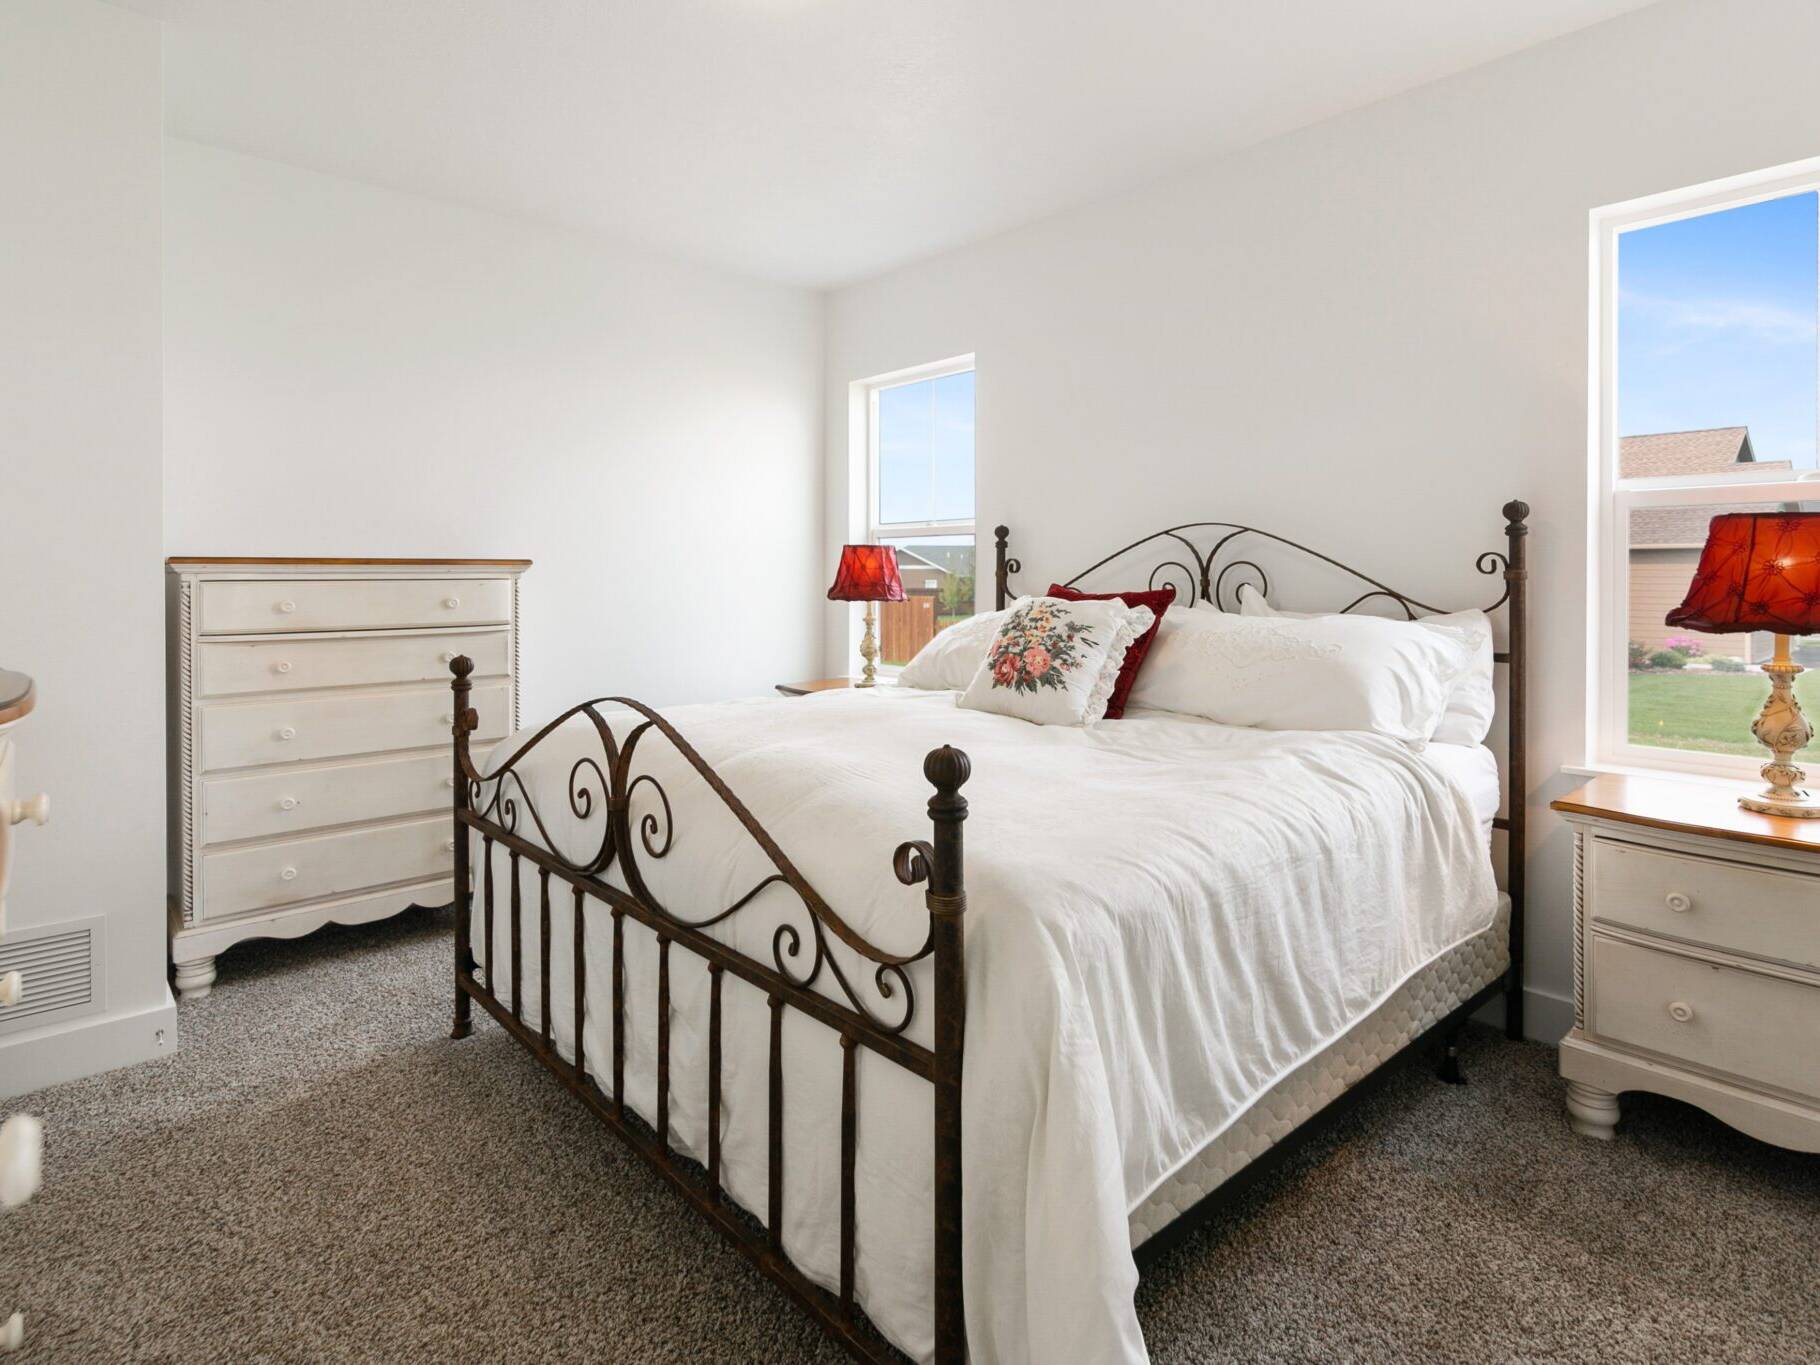 Master bedroom in The Seeley model home - Built by Big Sky Builder in Hamilton, MT